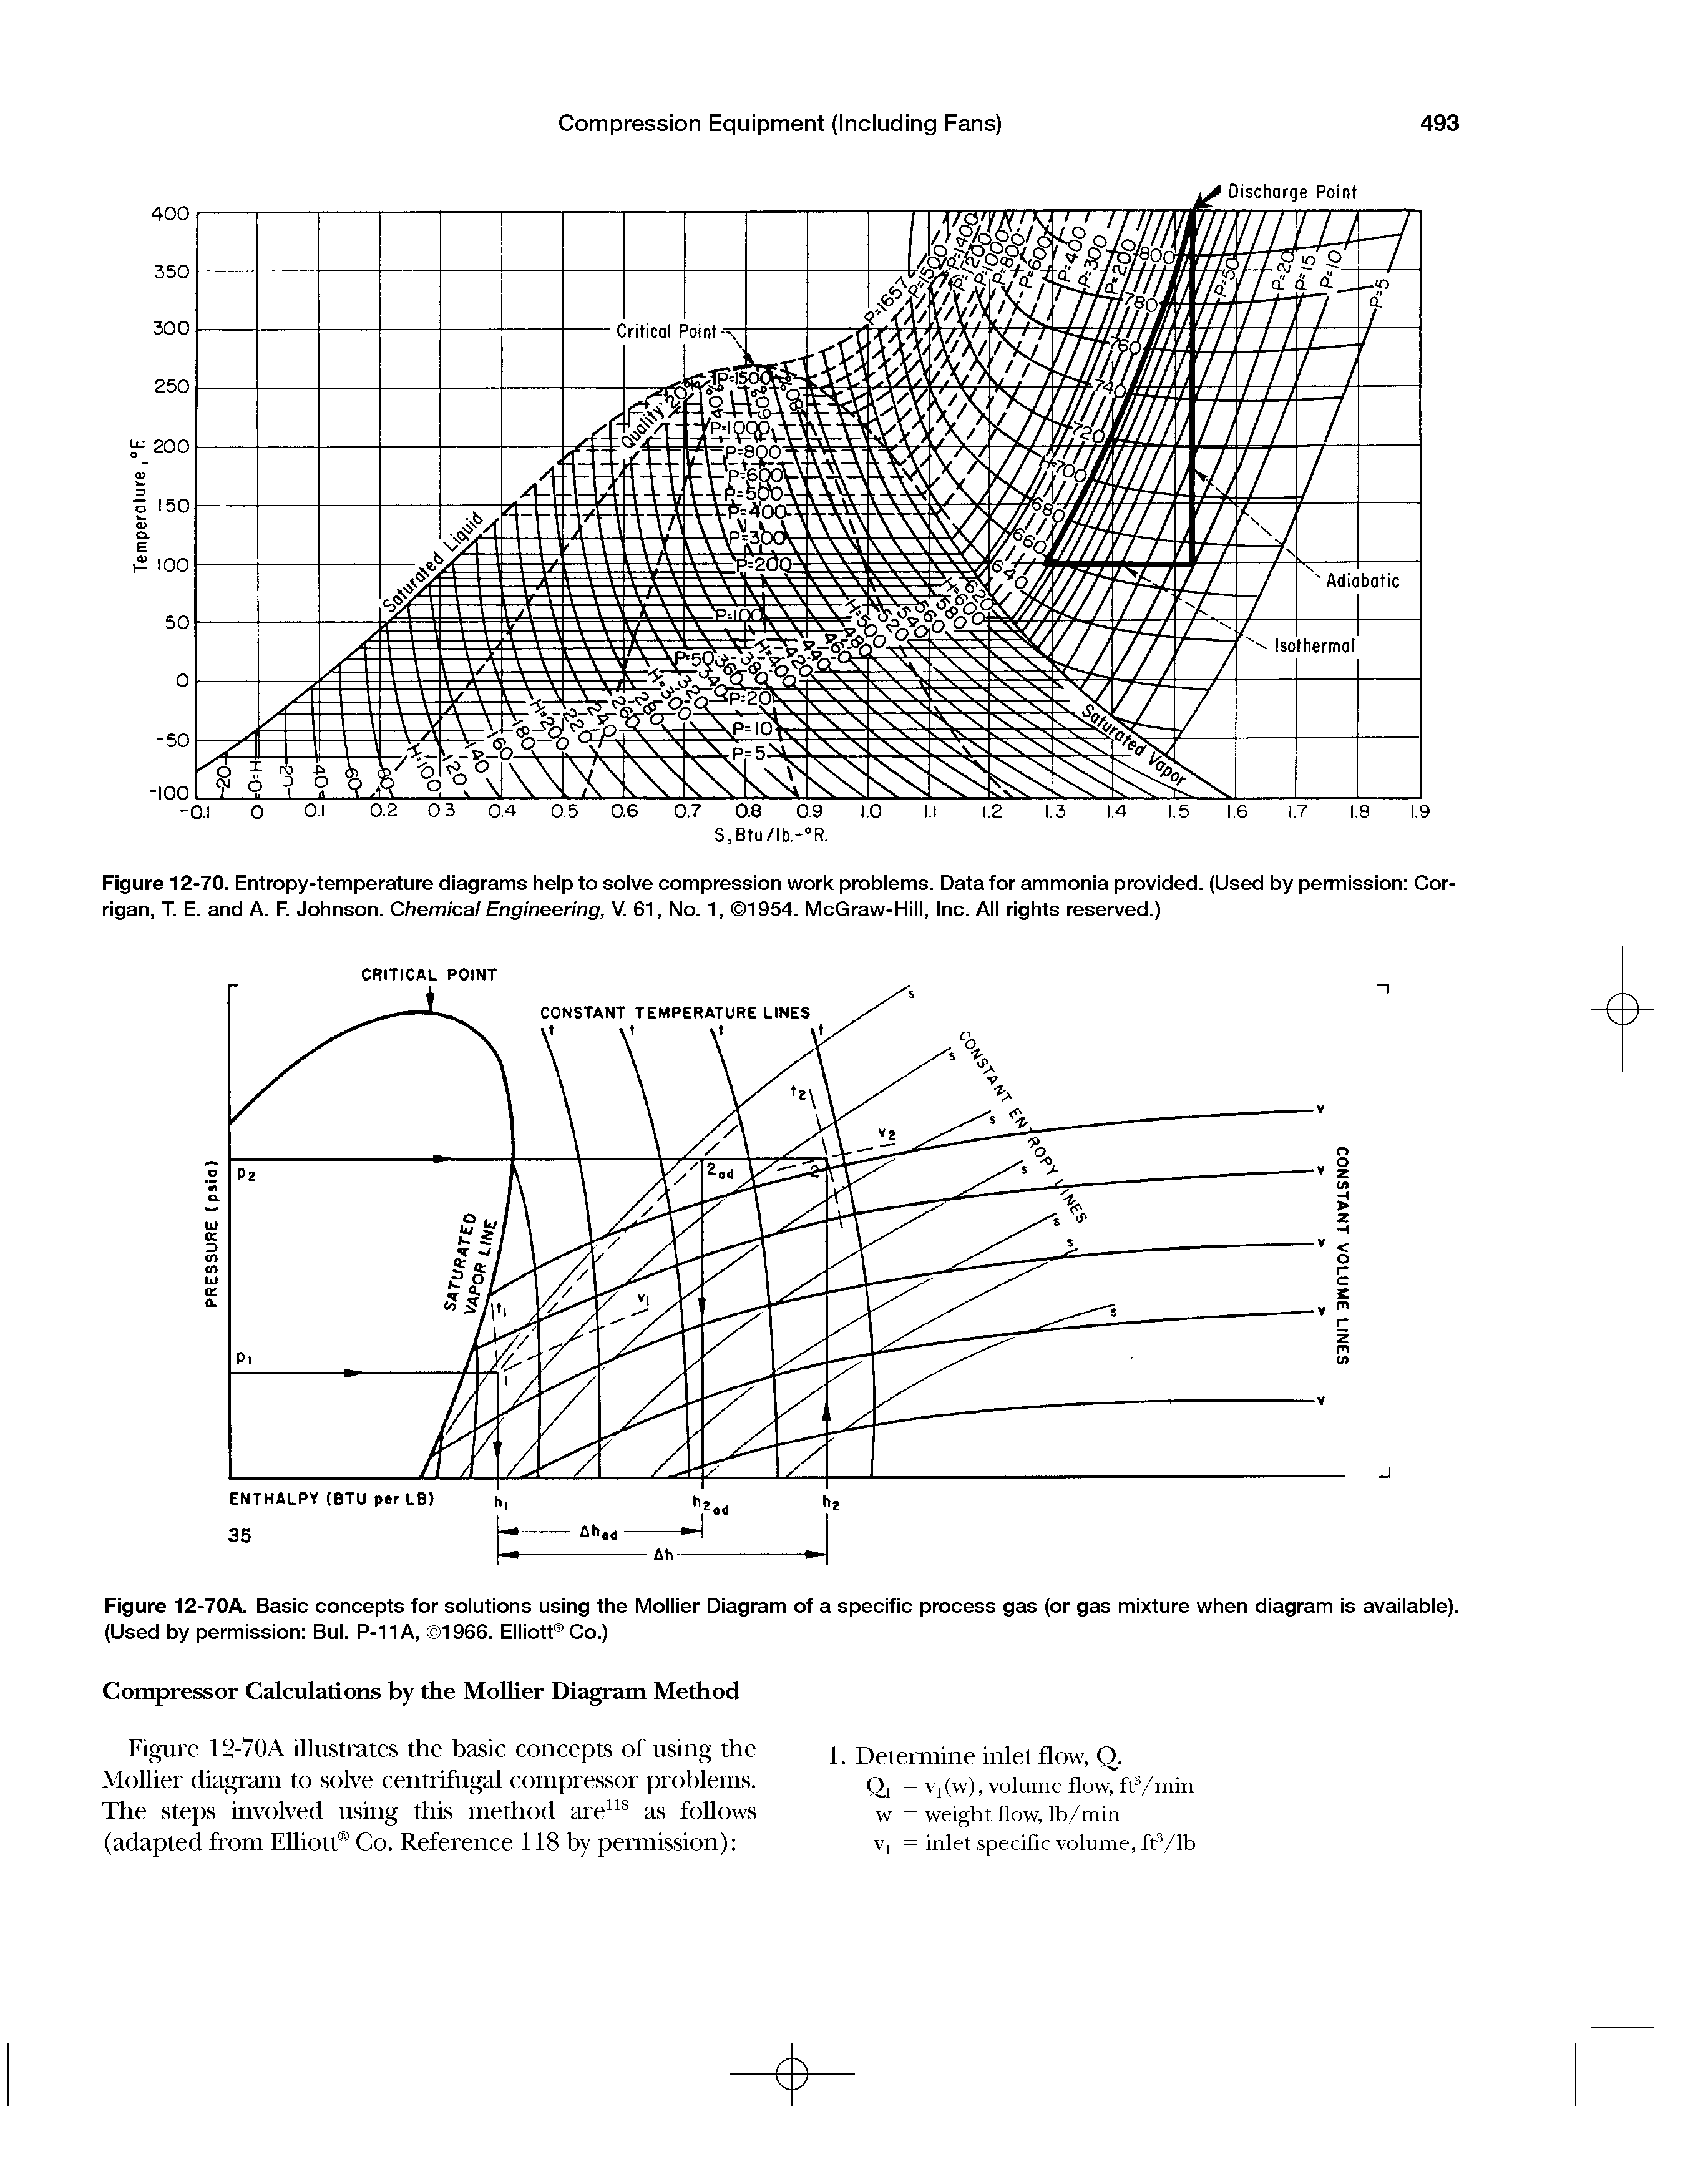 Figure 12-70. Entropy-temperature diagrams help to solve compression work problems. Data for ammonia provided. (Used by permission Corrigan, T. E. and A. F. Johnson. Chemical Engineering, V. 61, No. 1, 1954. McGraw-Hill, Inc. All rights reserved.)...